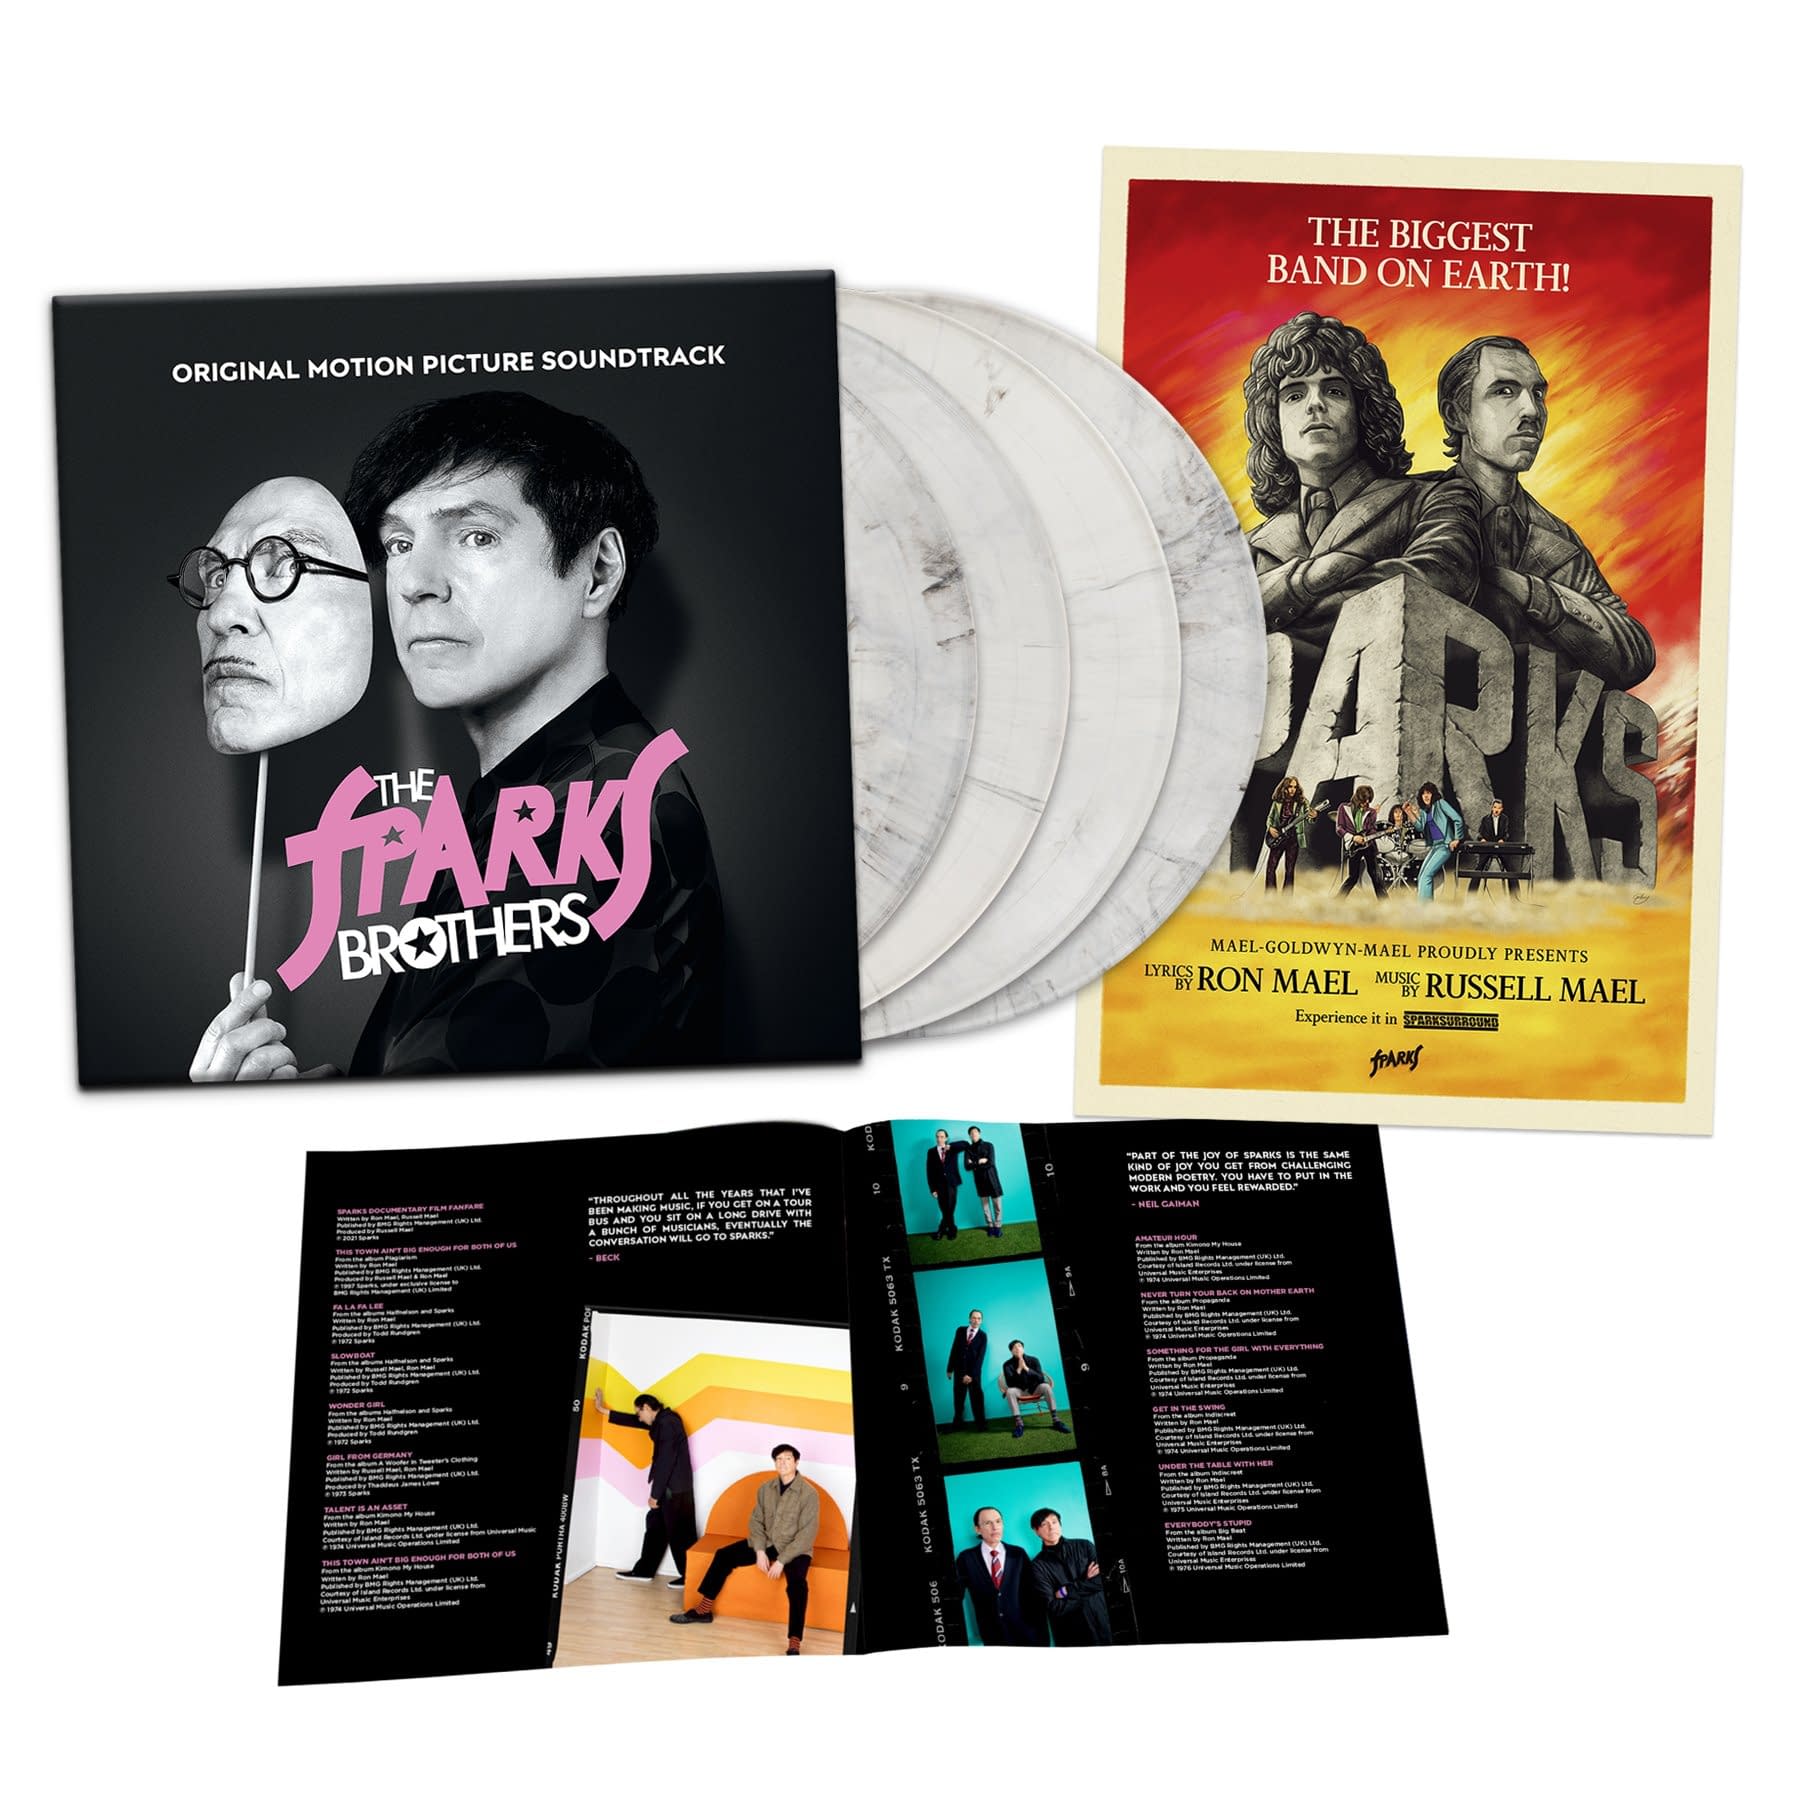 The Sparks Brothers Soundtrack Available Now From Waxwork Records